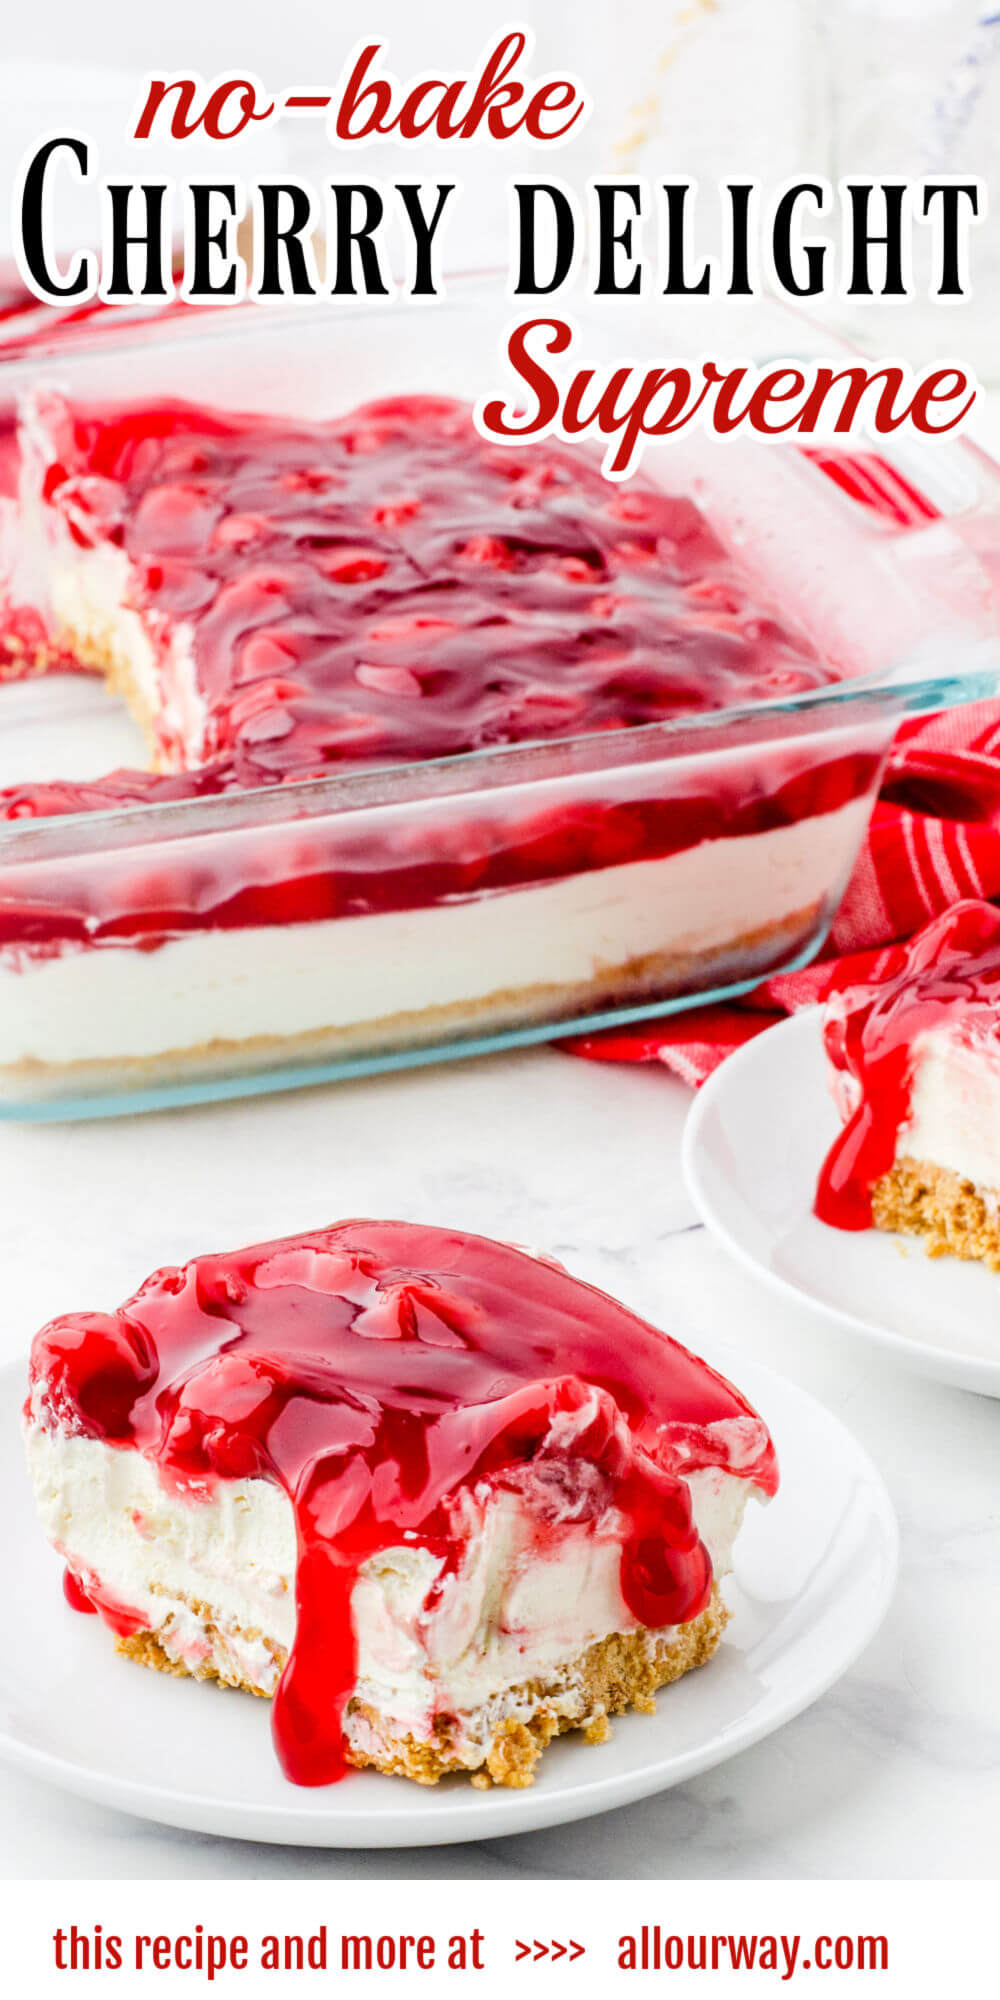 Cherry Delight Dessert is a no-bake dessert made with a Graham cracker crust, cream cheese filling, and cherry pie topping. Sweet, creamy, and tangy! This easy refrigerator dessert is always a year-round favorite.